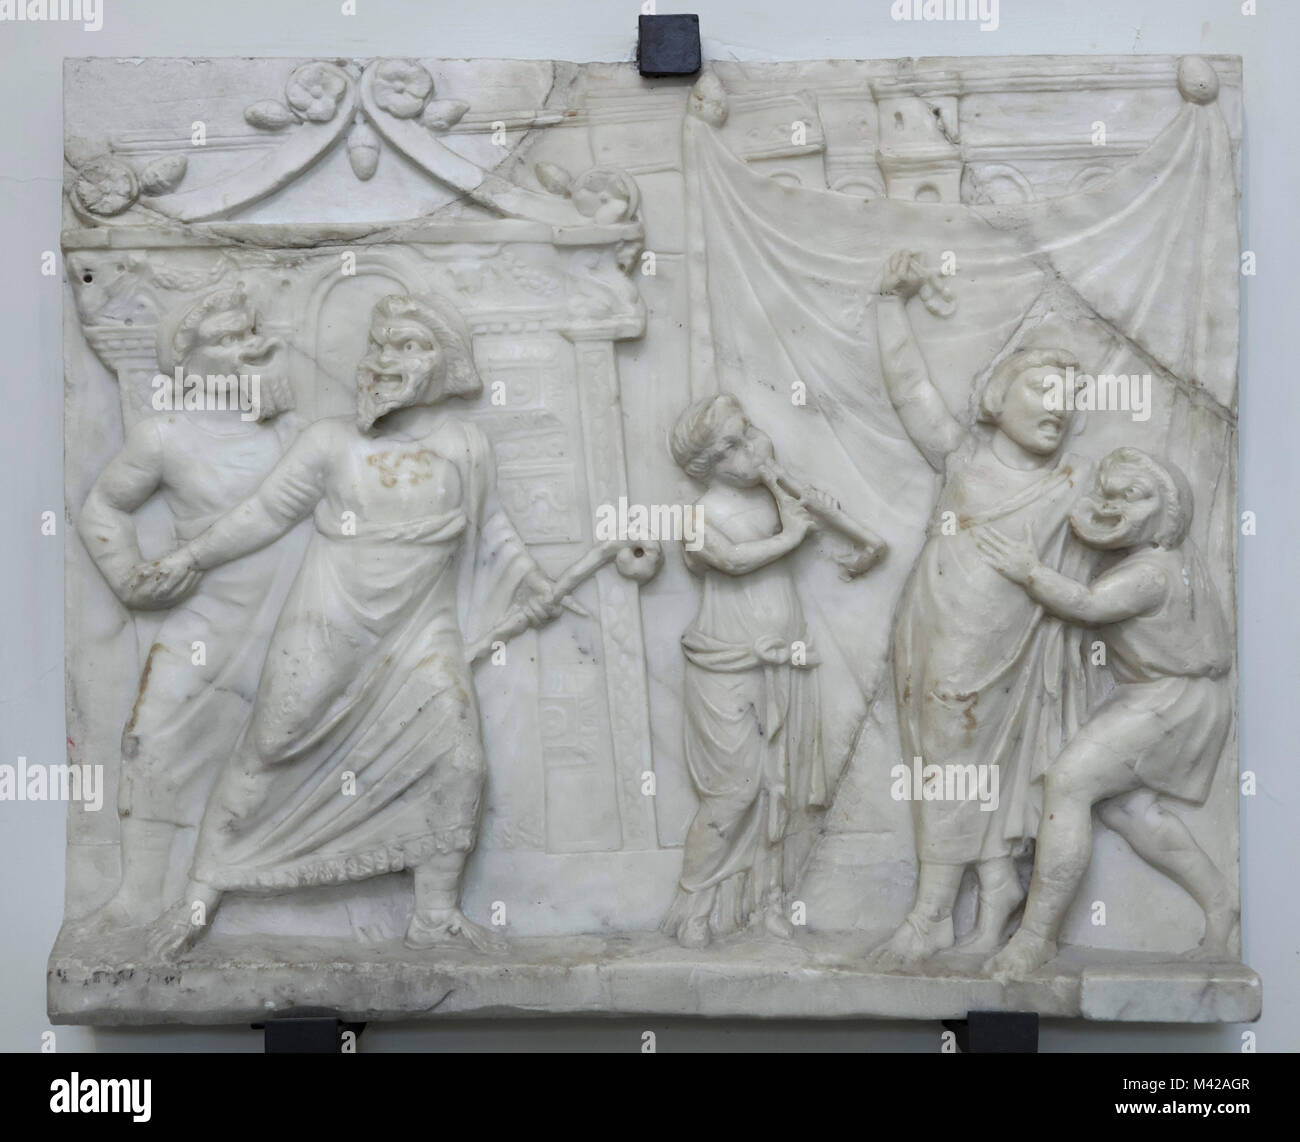 Theatrical scene depicted in the Roman marble relief from the 1st century AD from the Farnese Collection on display in the National Archaeological Museum in Naples, Campania, Italy. Stock Photo